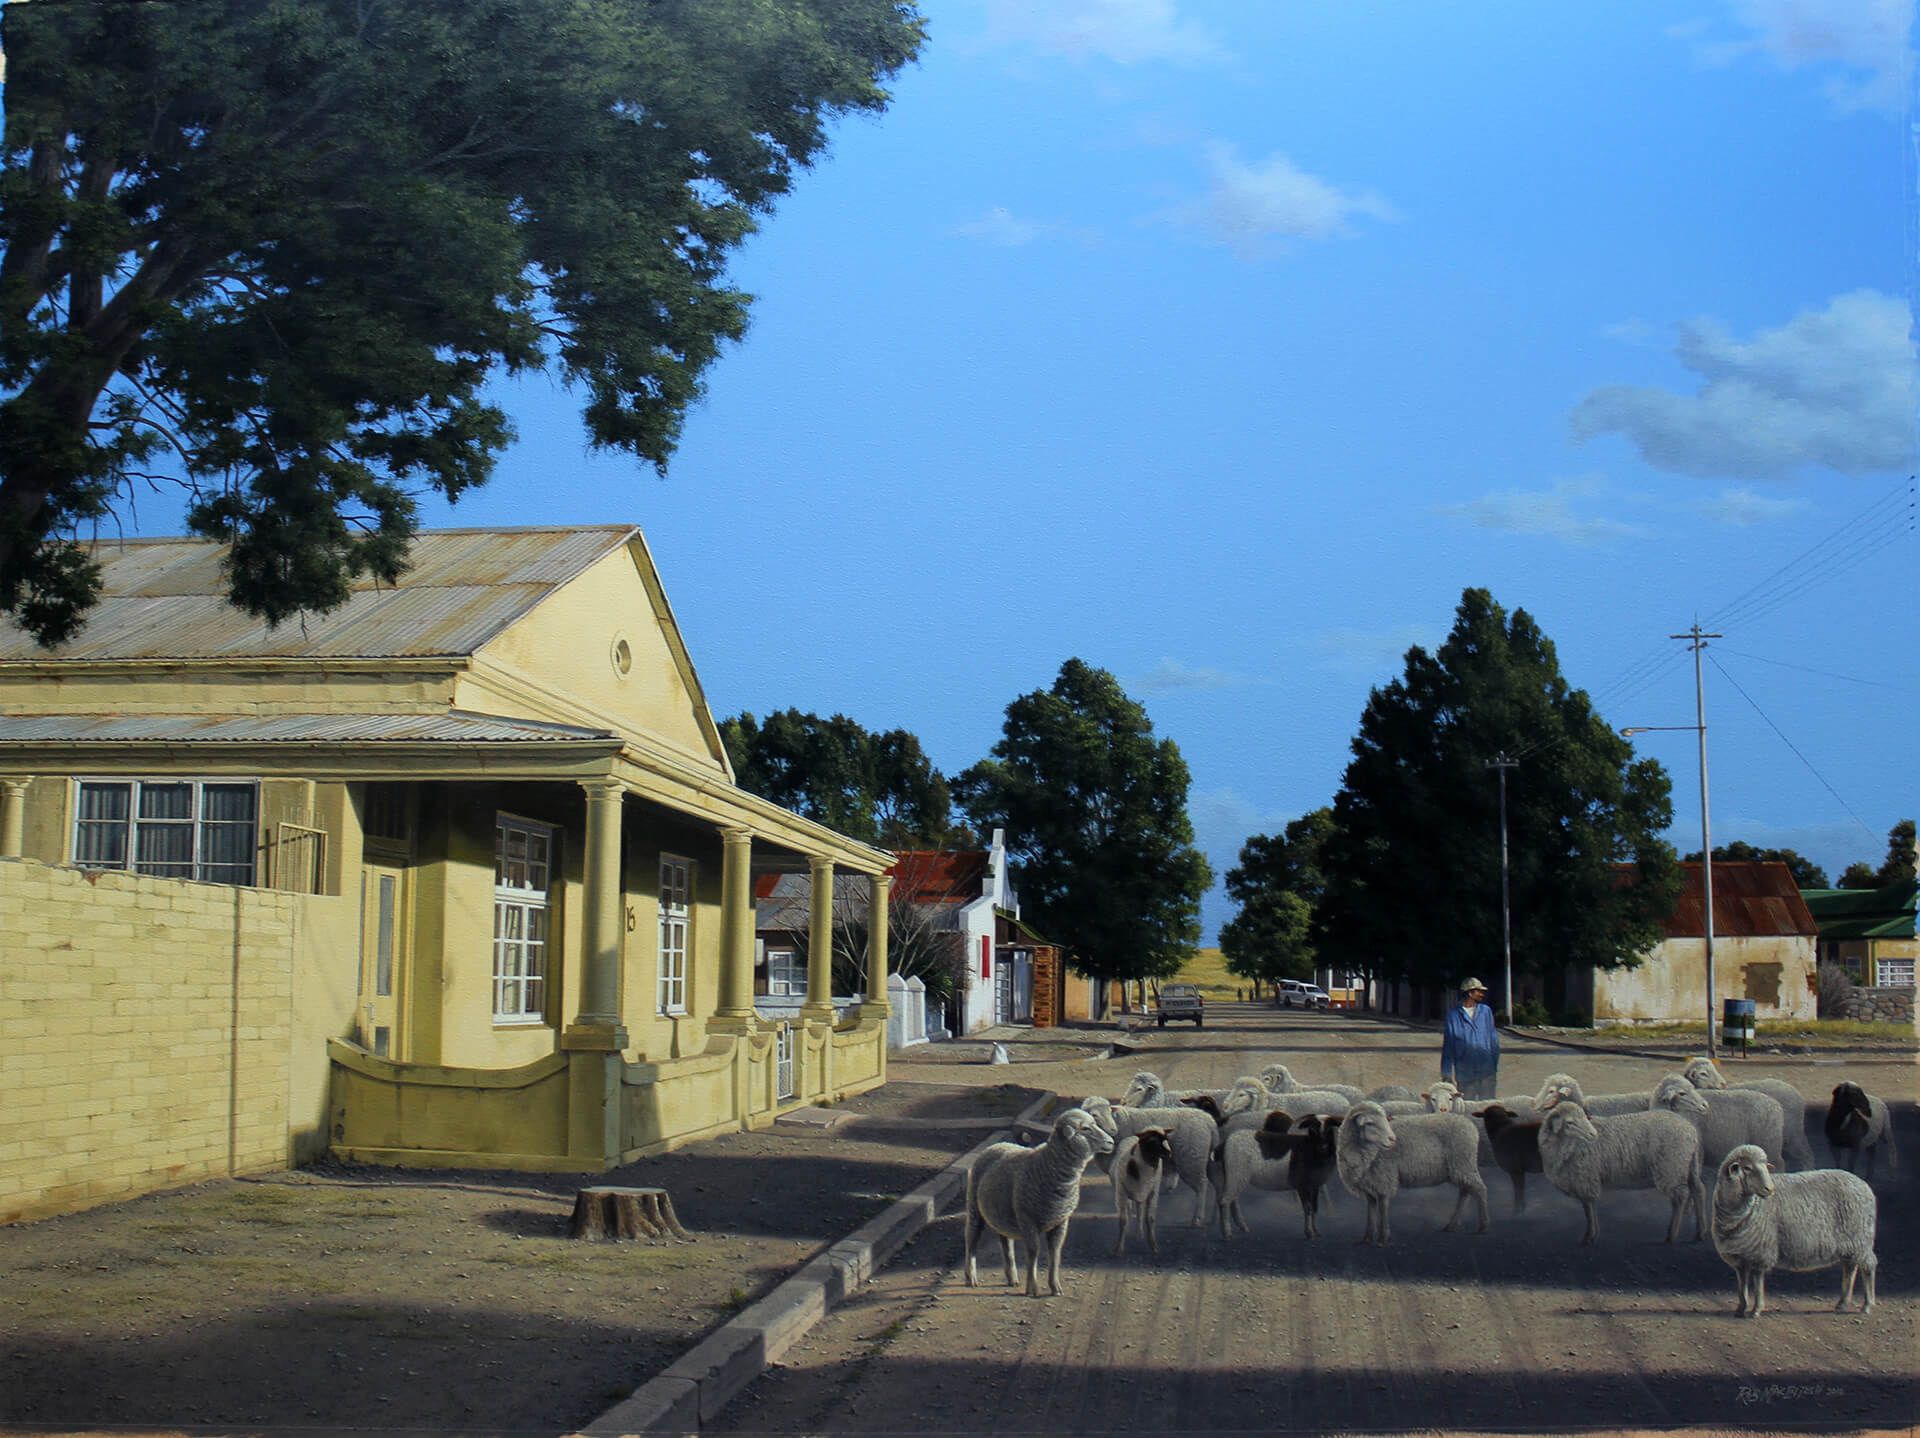 Photorealistic painting of a man herding sheep down a street in a neighborhood